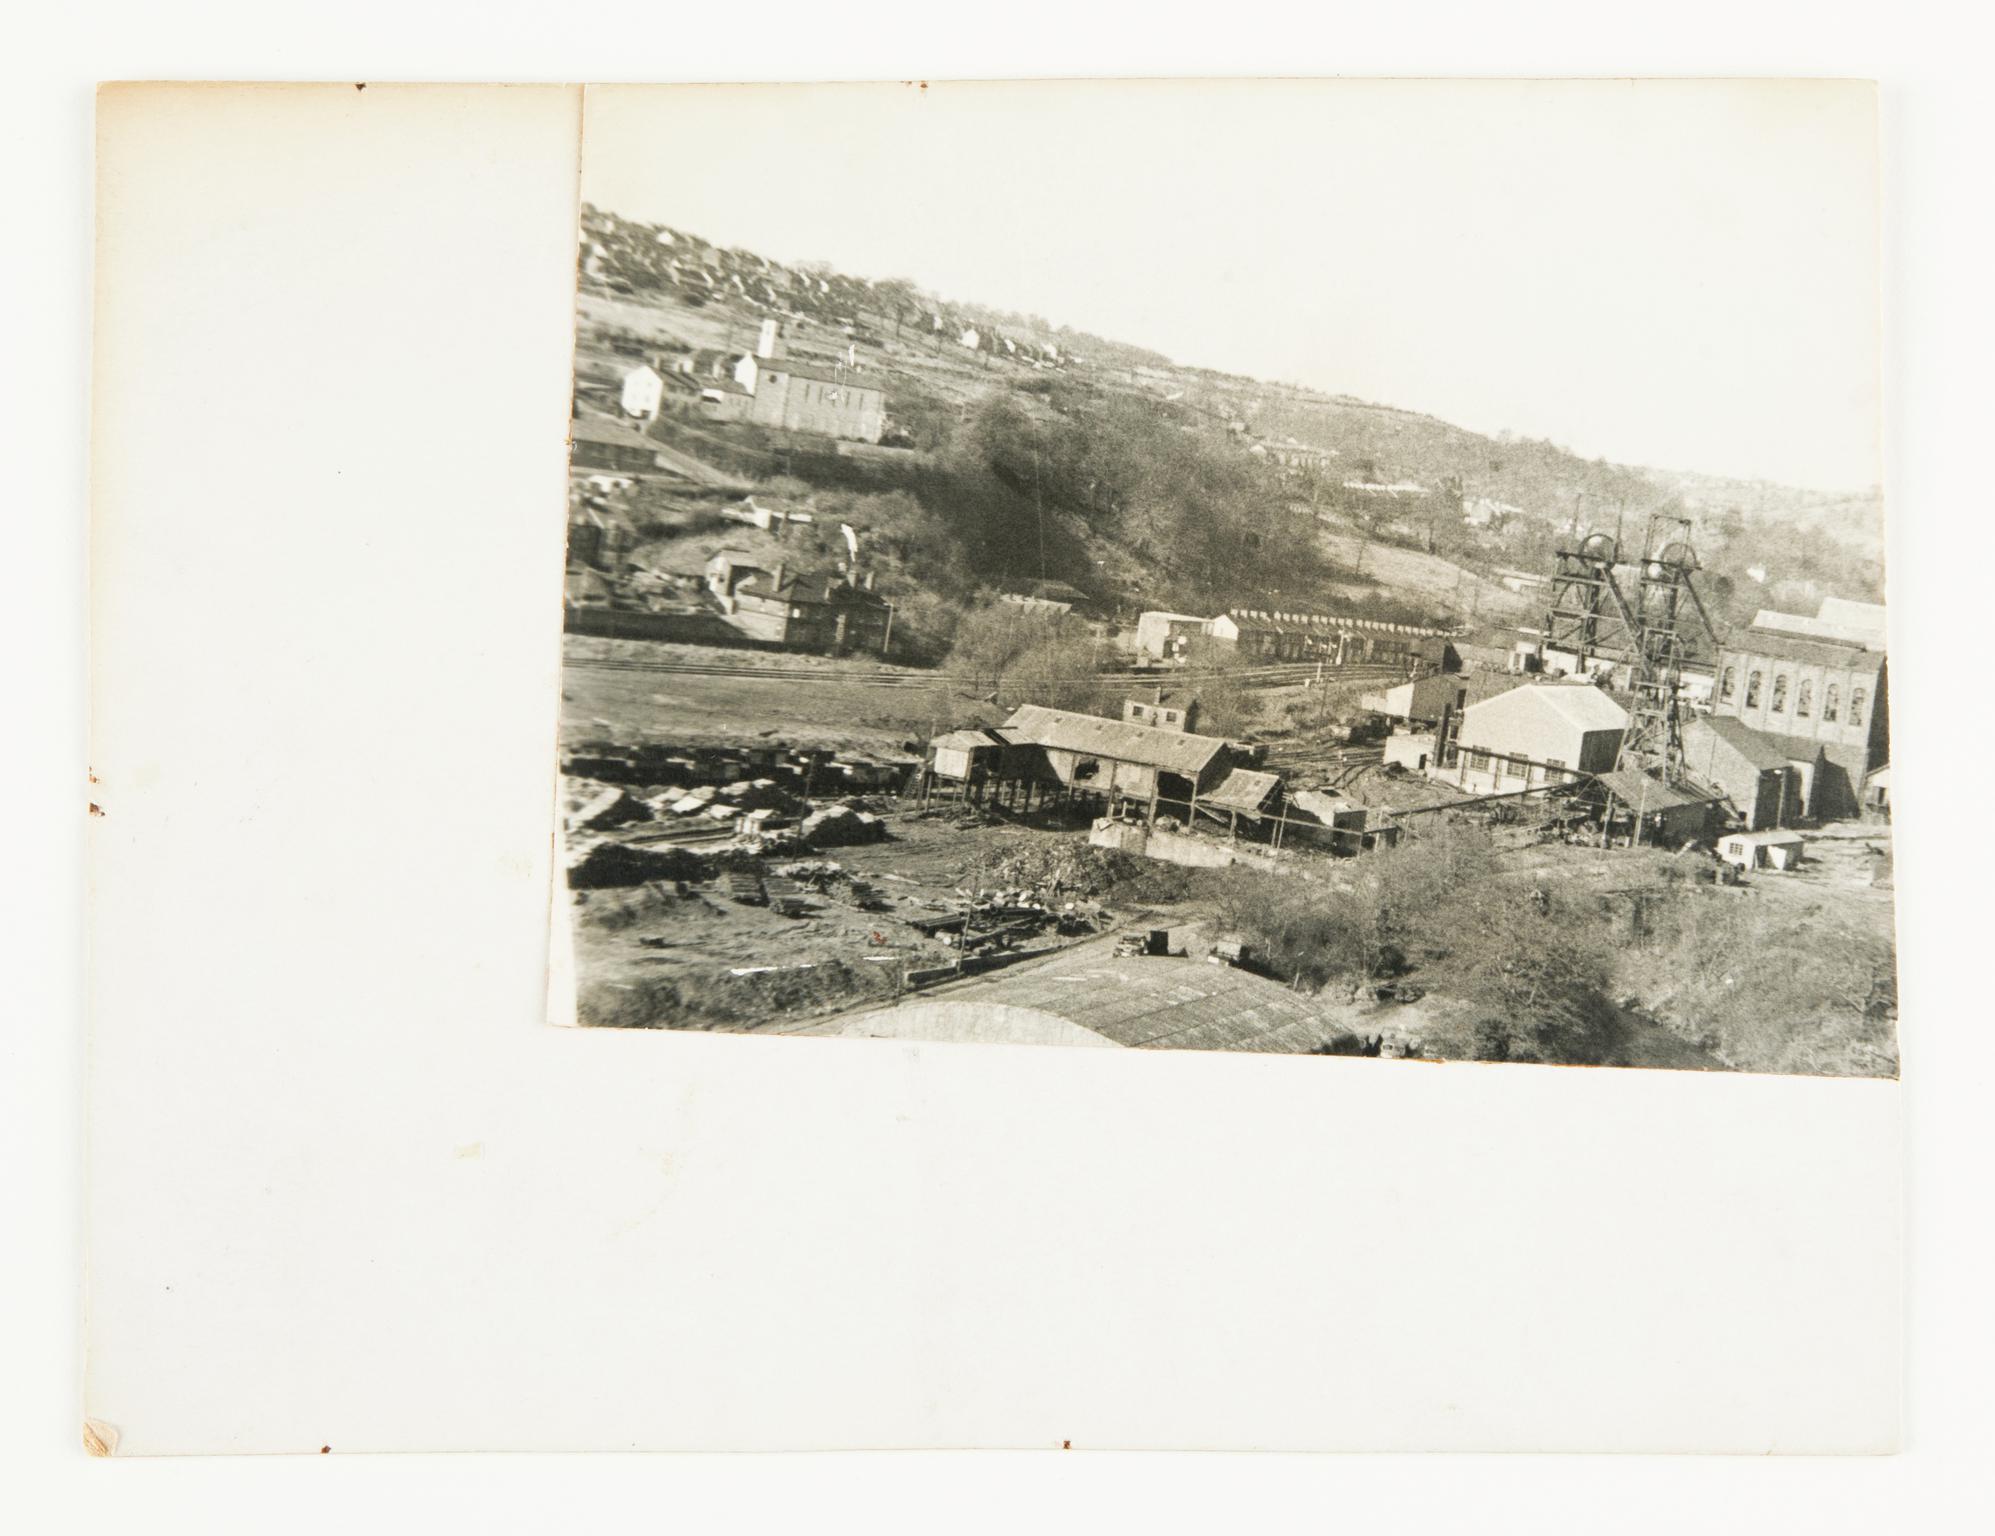 Celynen North Colliery, photograph